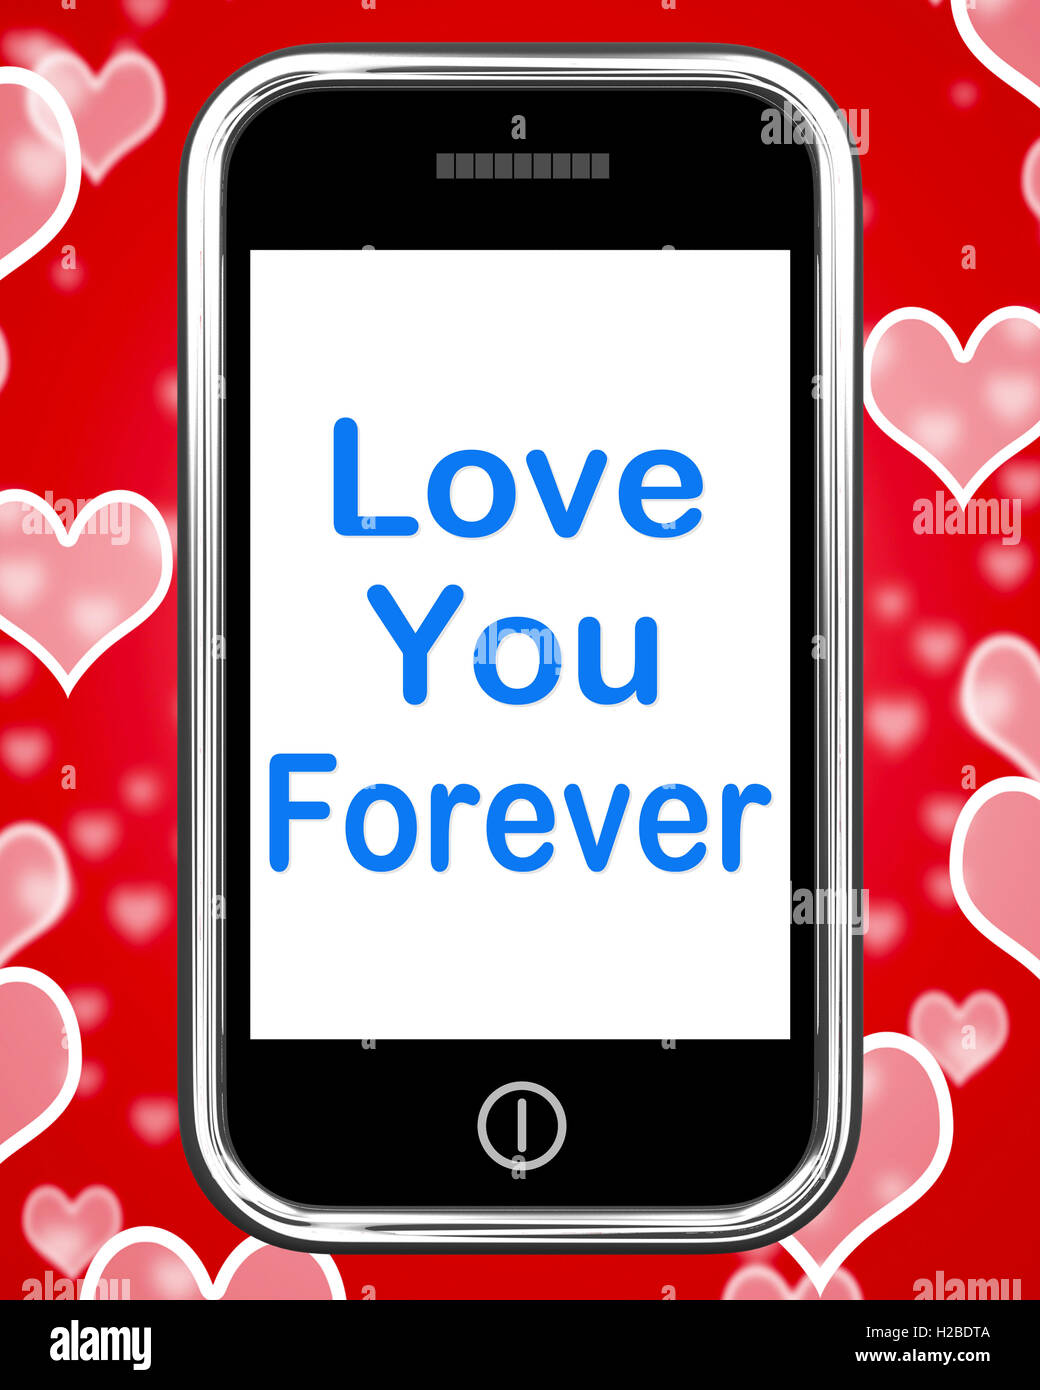 Love You Forever On Phone Means Endless Devotion For Eternity Stock Photo